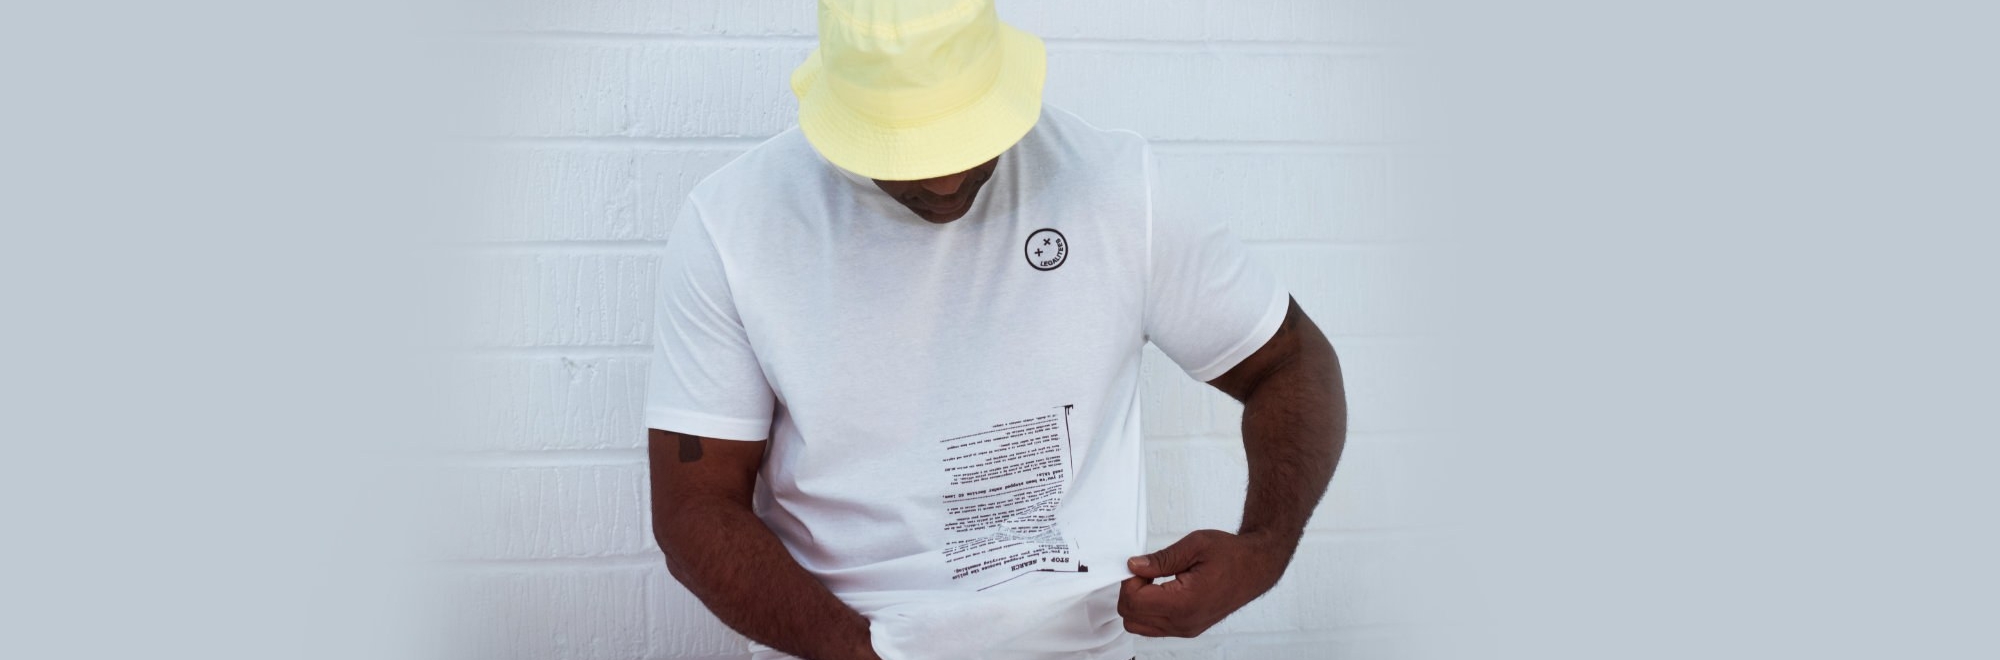 Legalitees: Hijinks launches t-shirts highlighting stop and search rights to mark Human Rights Day